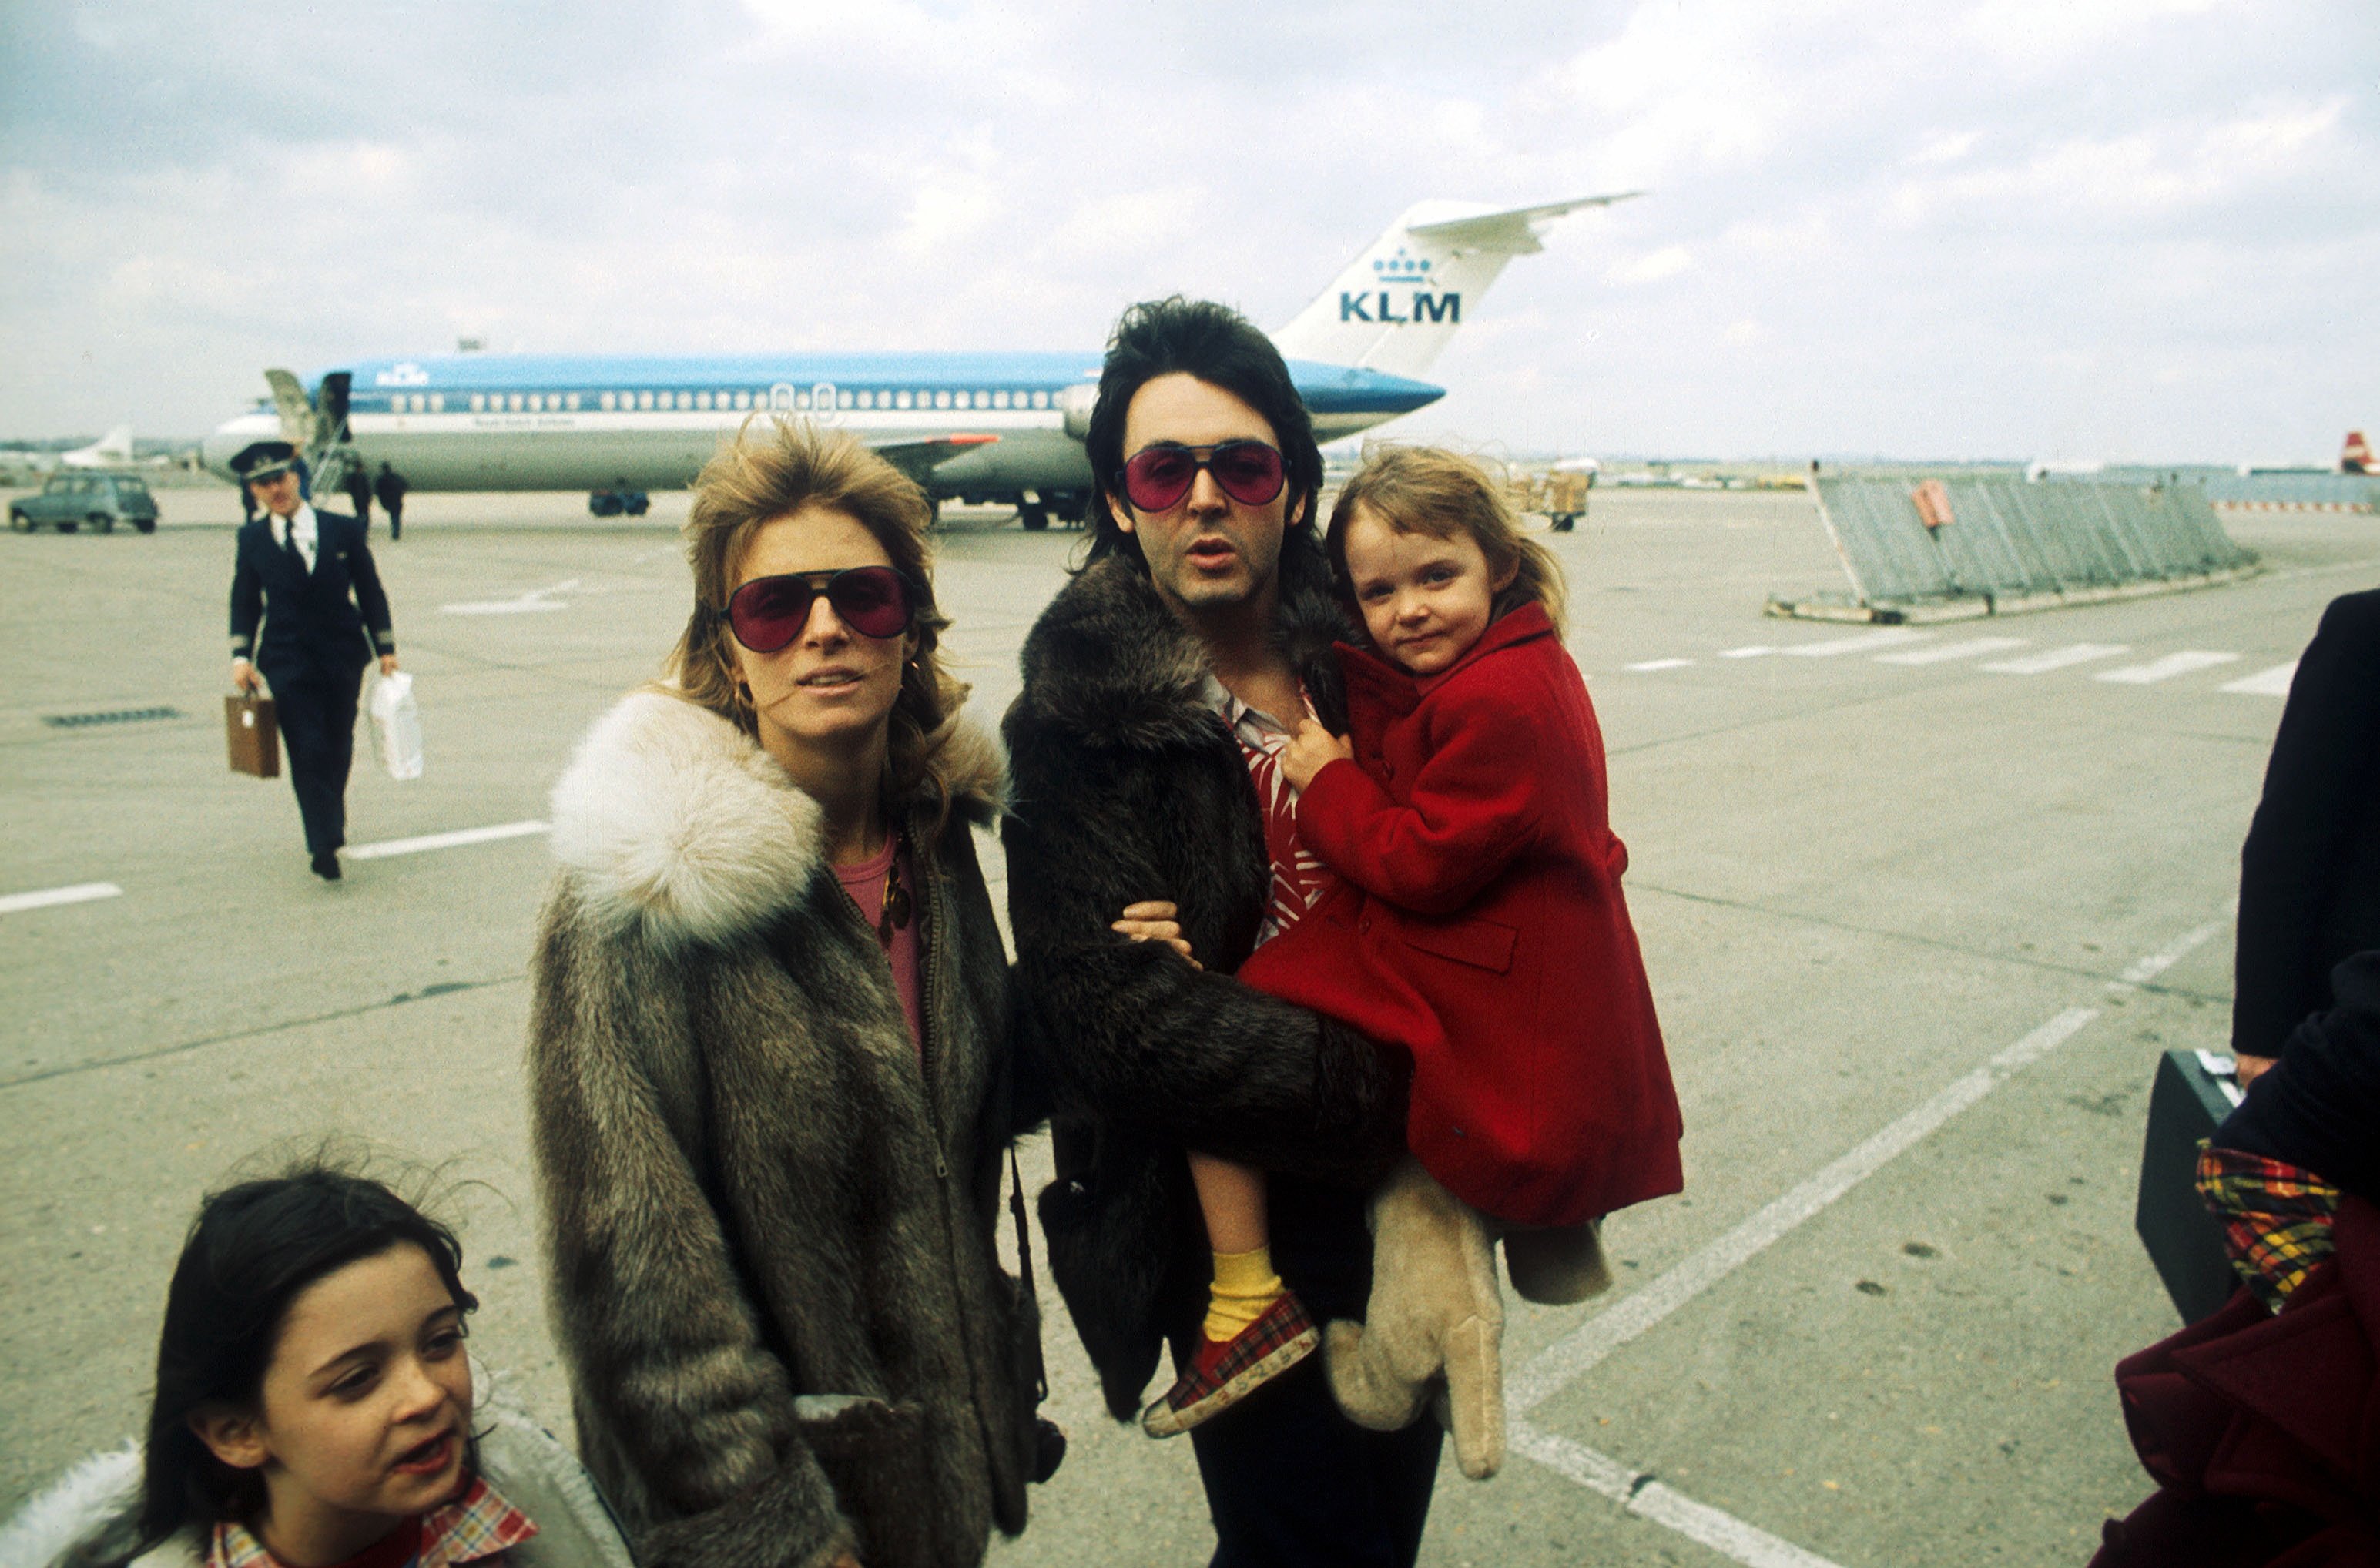 Paul McCartney, his wife Linda, and their daughter Stella McCartney arrive at the airport in April 1998 in the United Kingdom. | Source: Getty Images